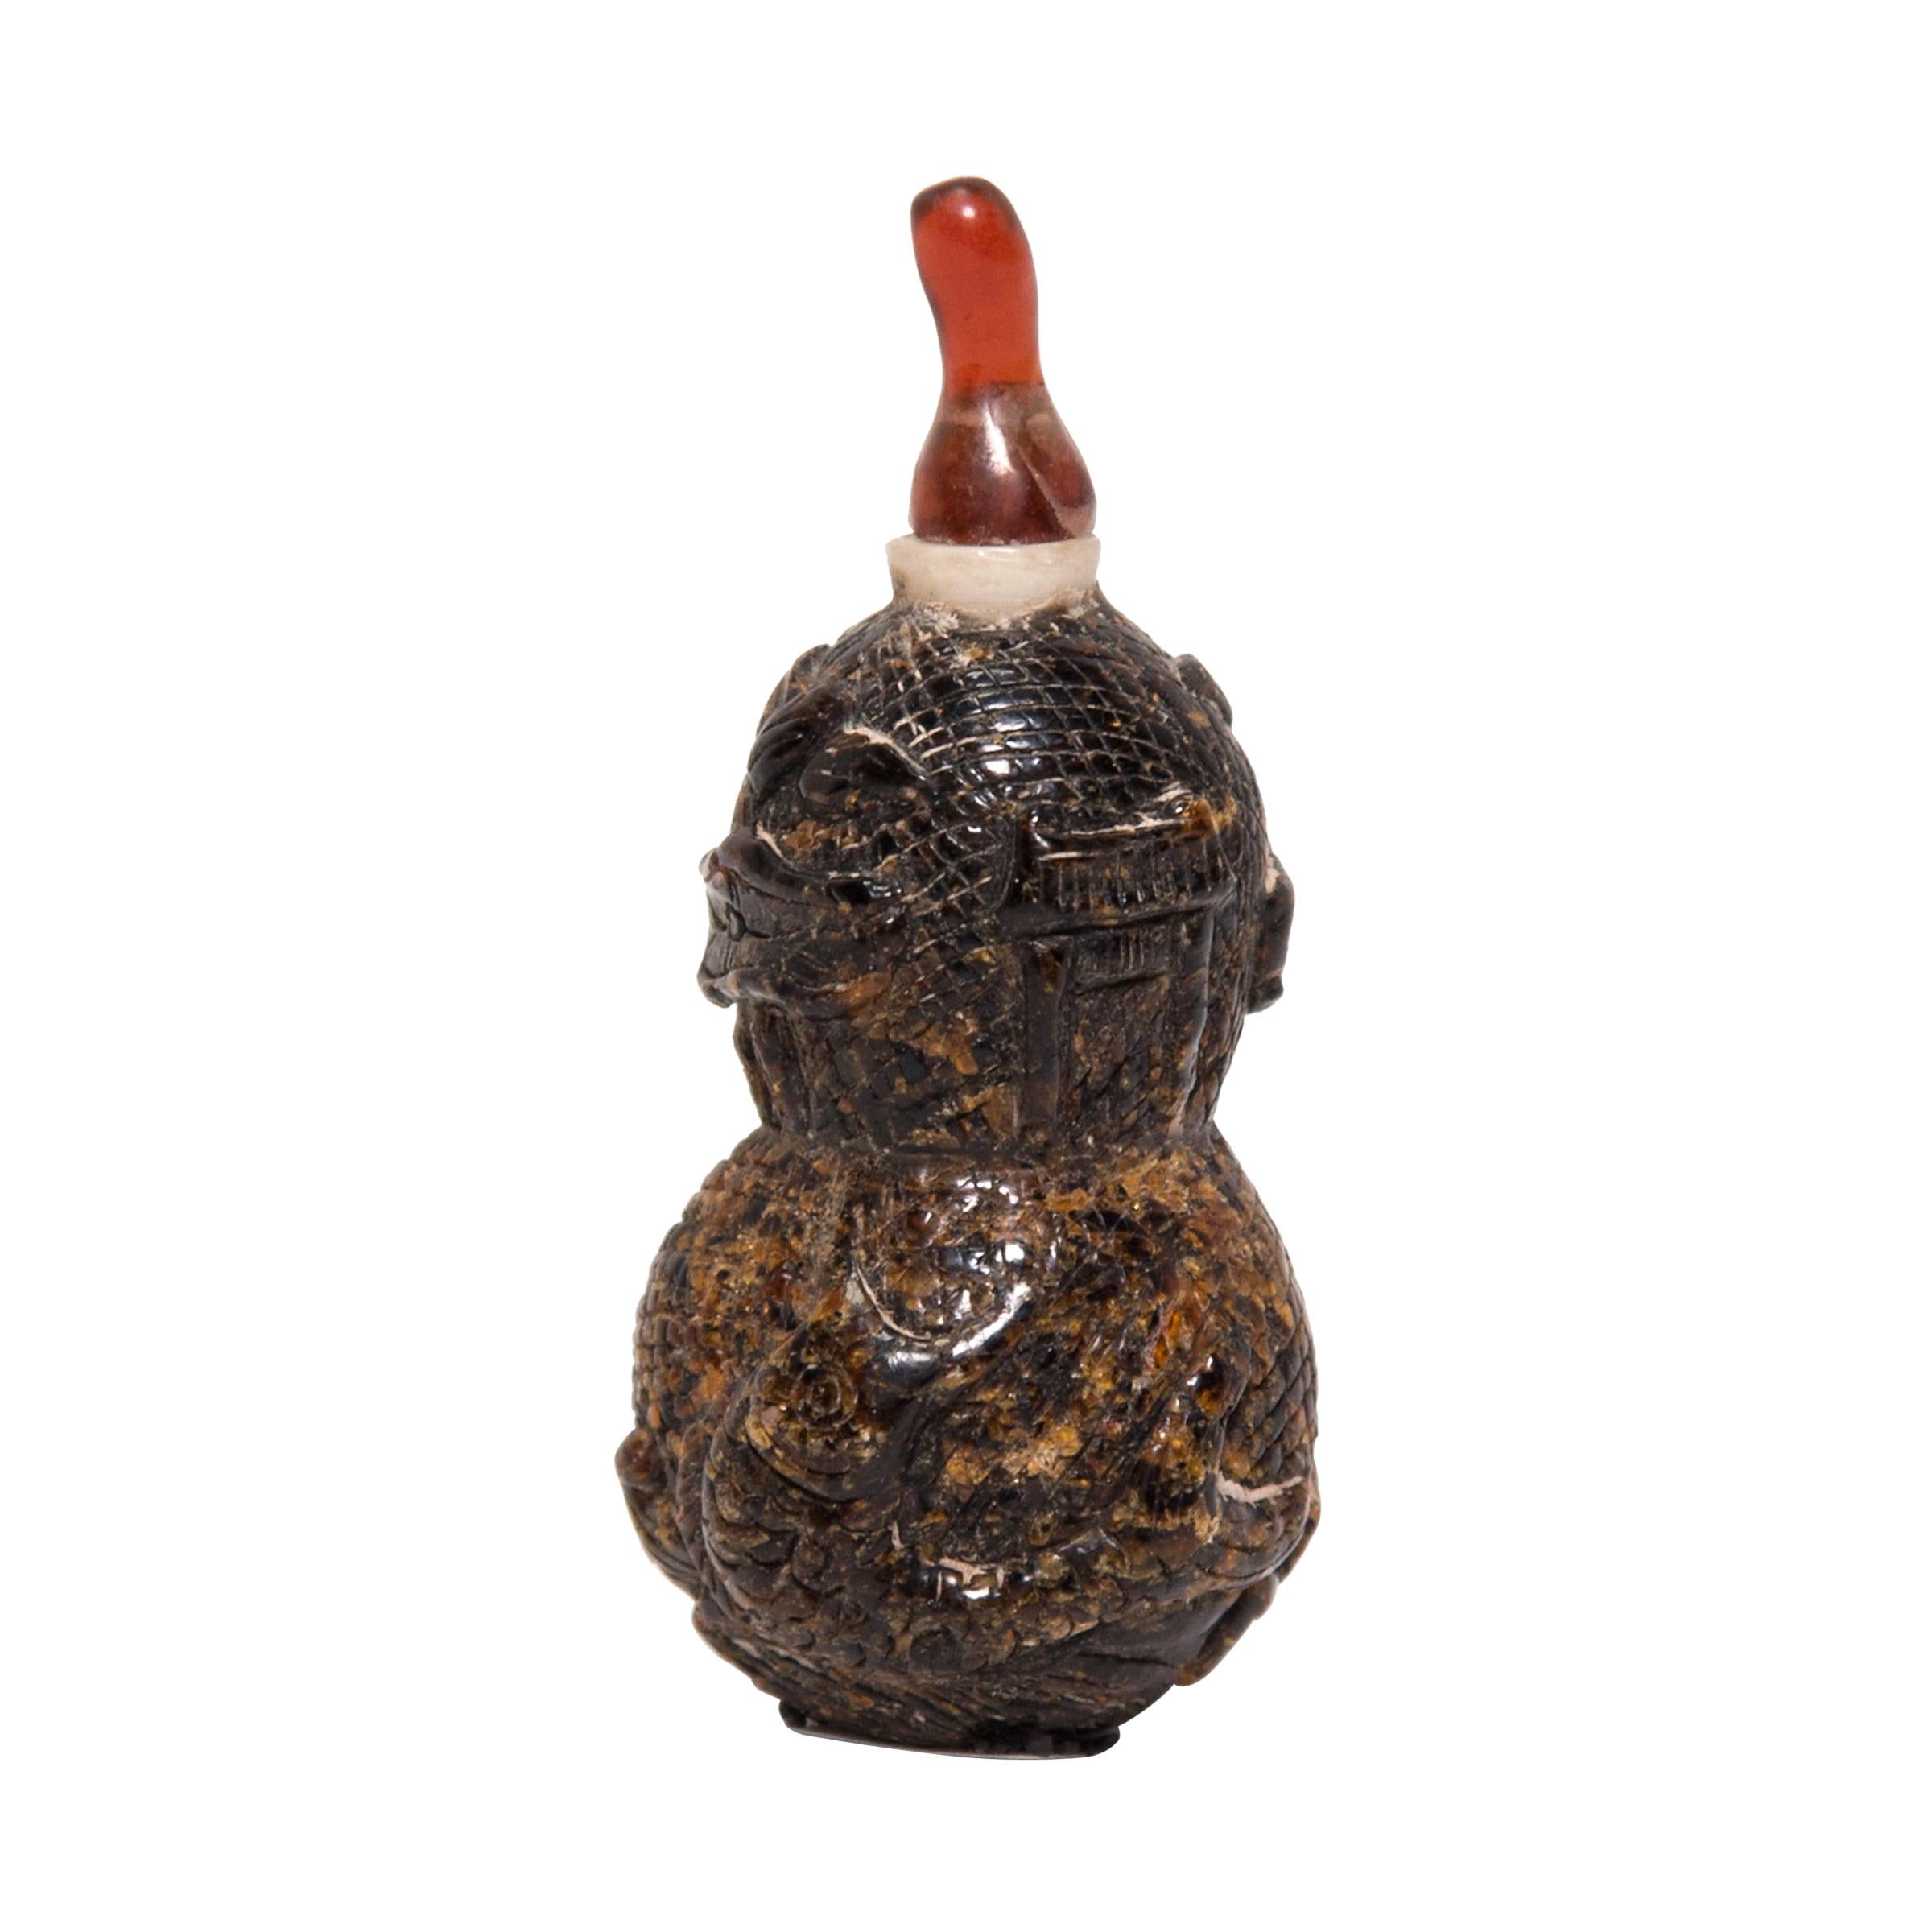 Chinese Double Gourd "Root" Amber Snuff Bottle, c. 1900